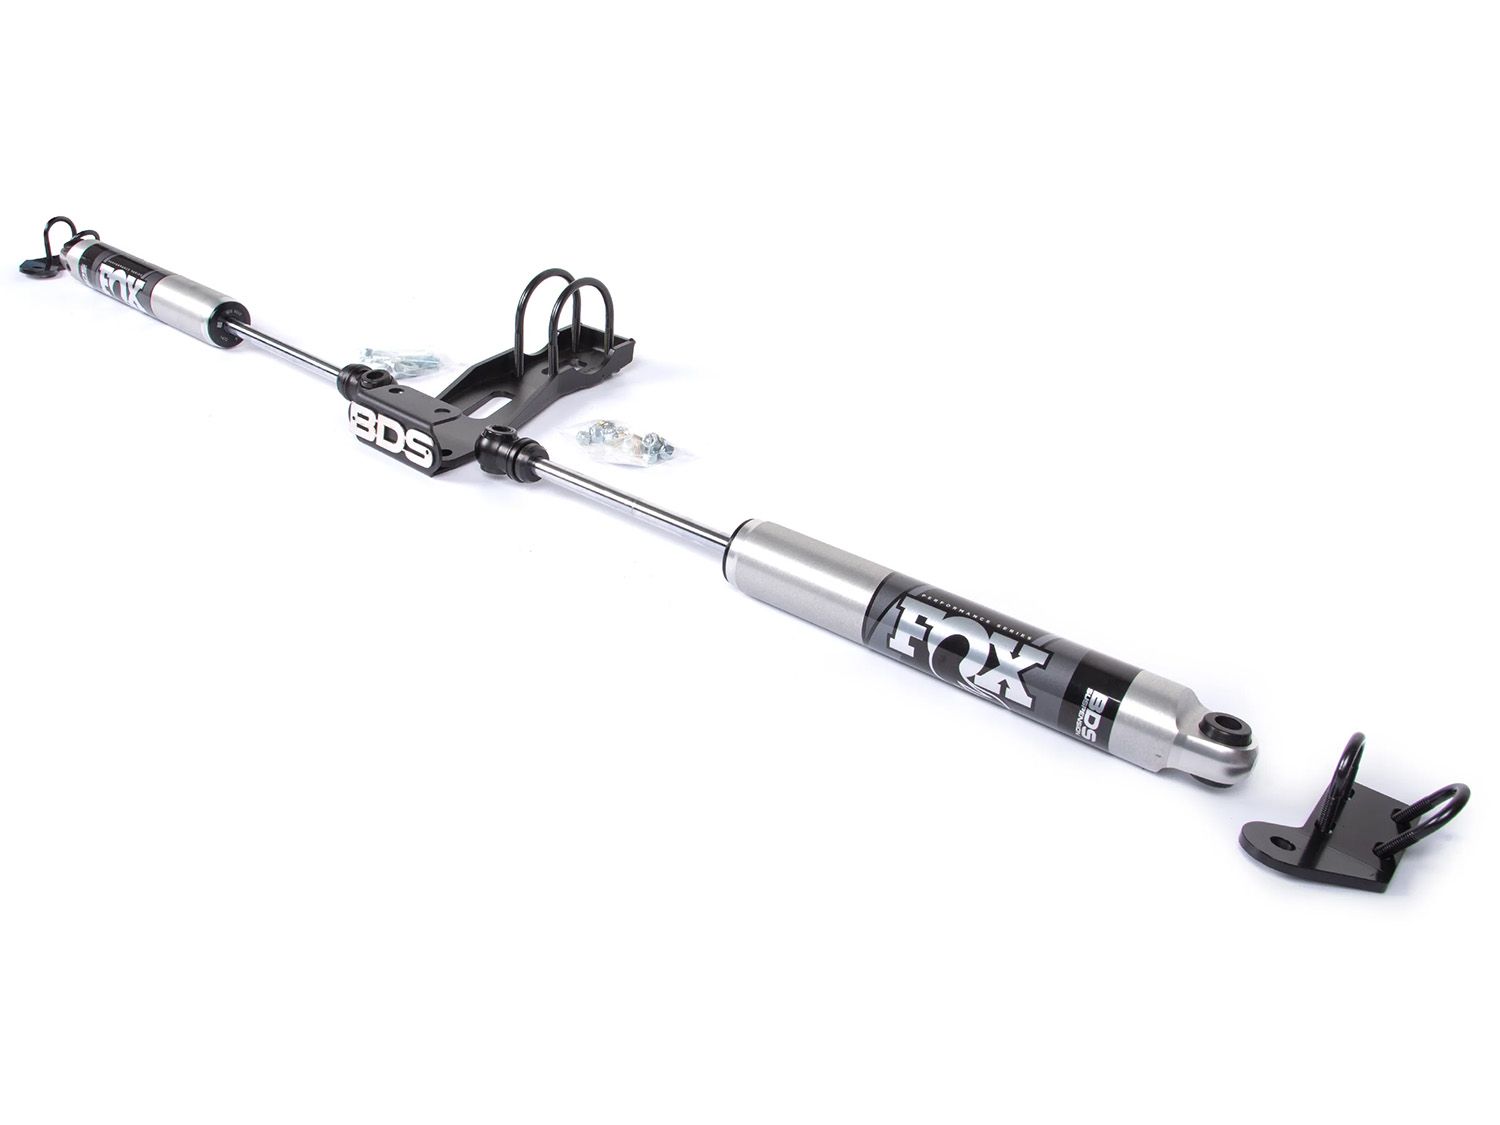 Pickup 1/2 & 3/4 ton 1973-1987 Chevy/GMC 4WD - Fox Dual Steering Stabilizer by BDS